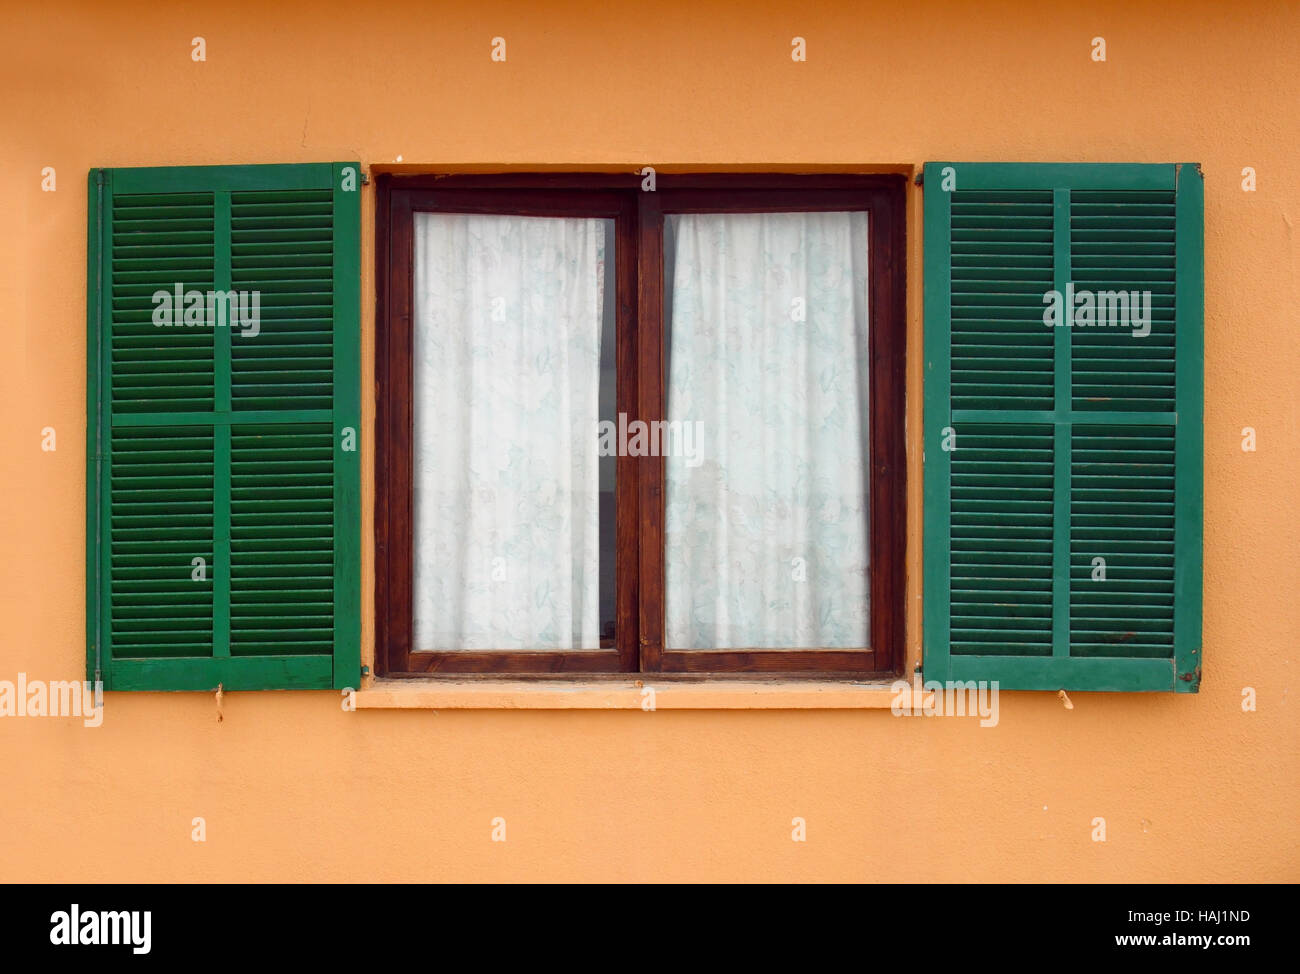 opened green window shutters on yellow house facade Stock Photo